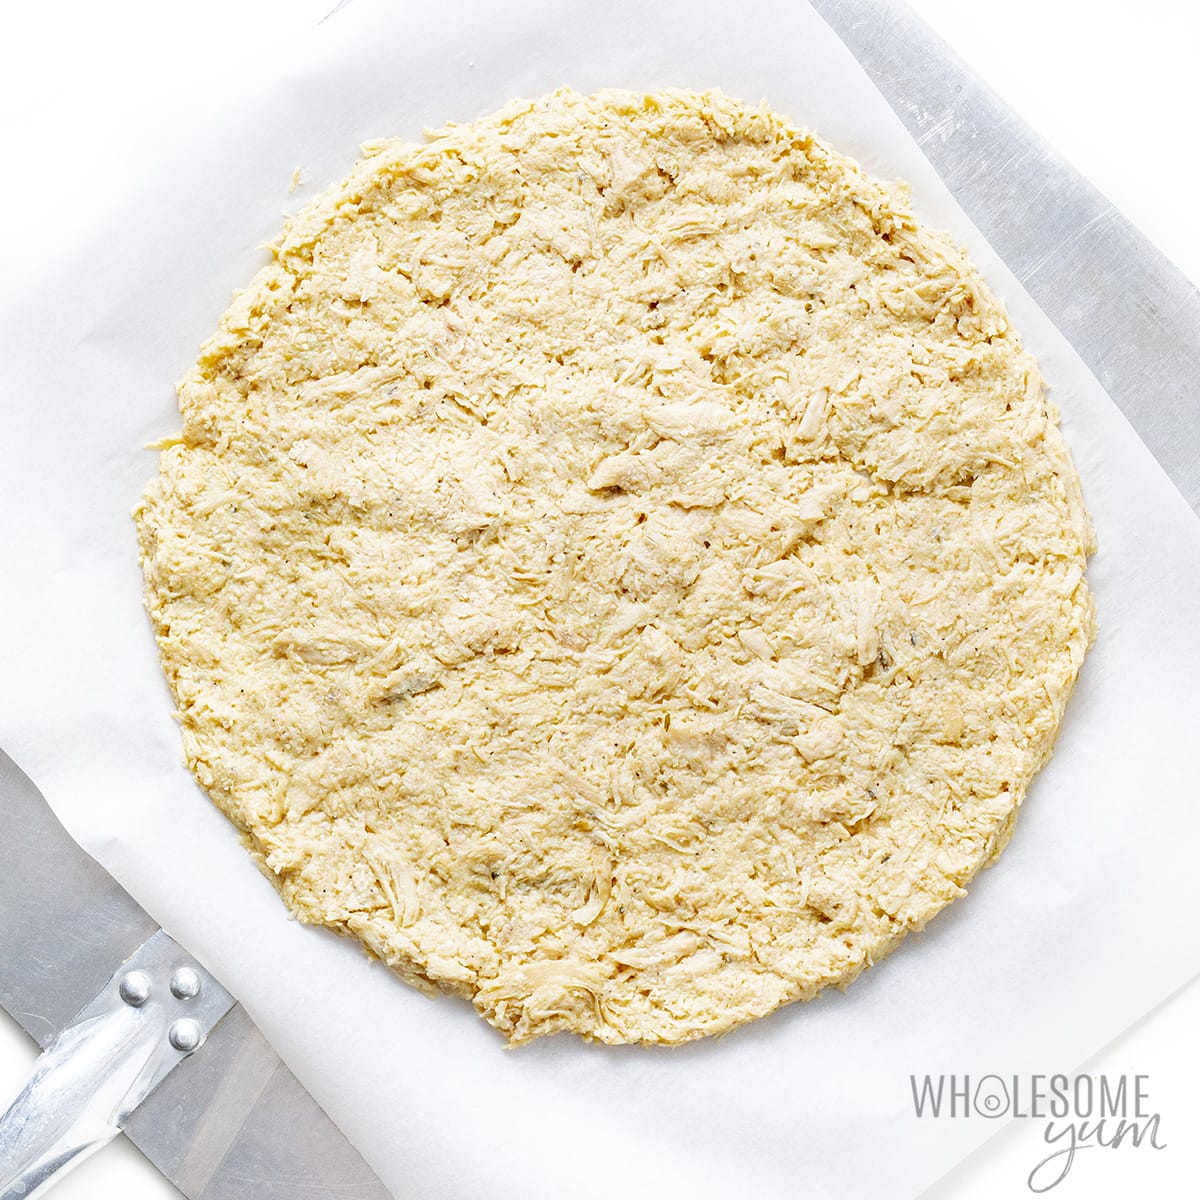 Dough made into pizza crust.